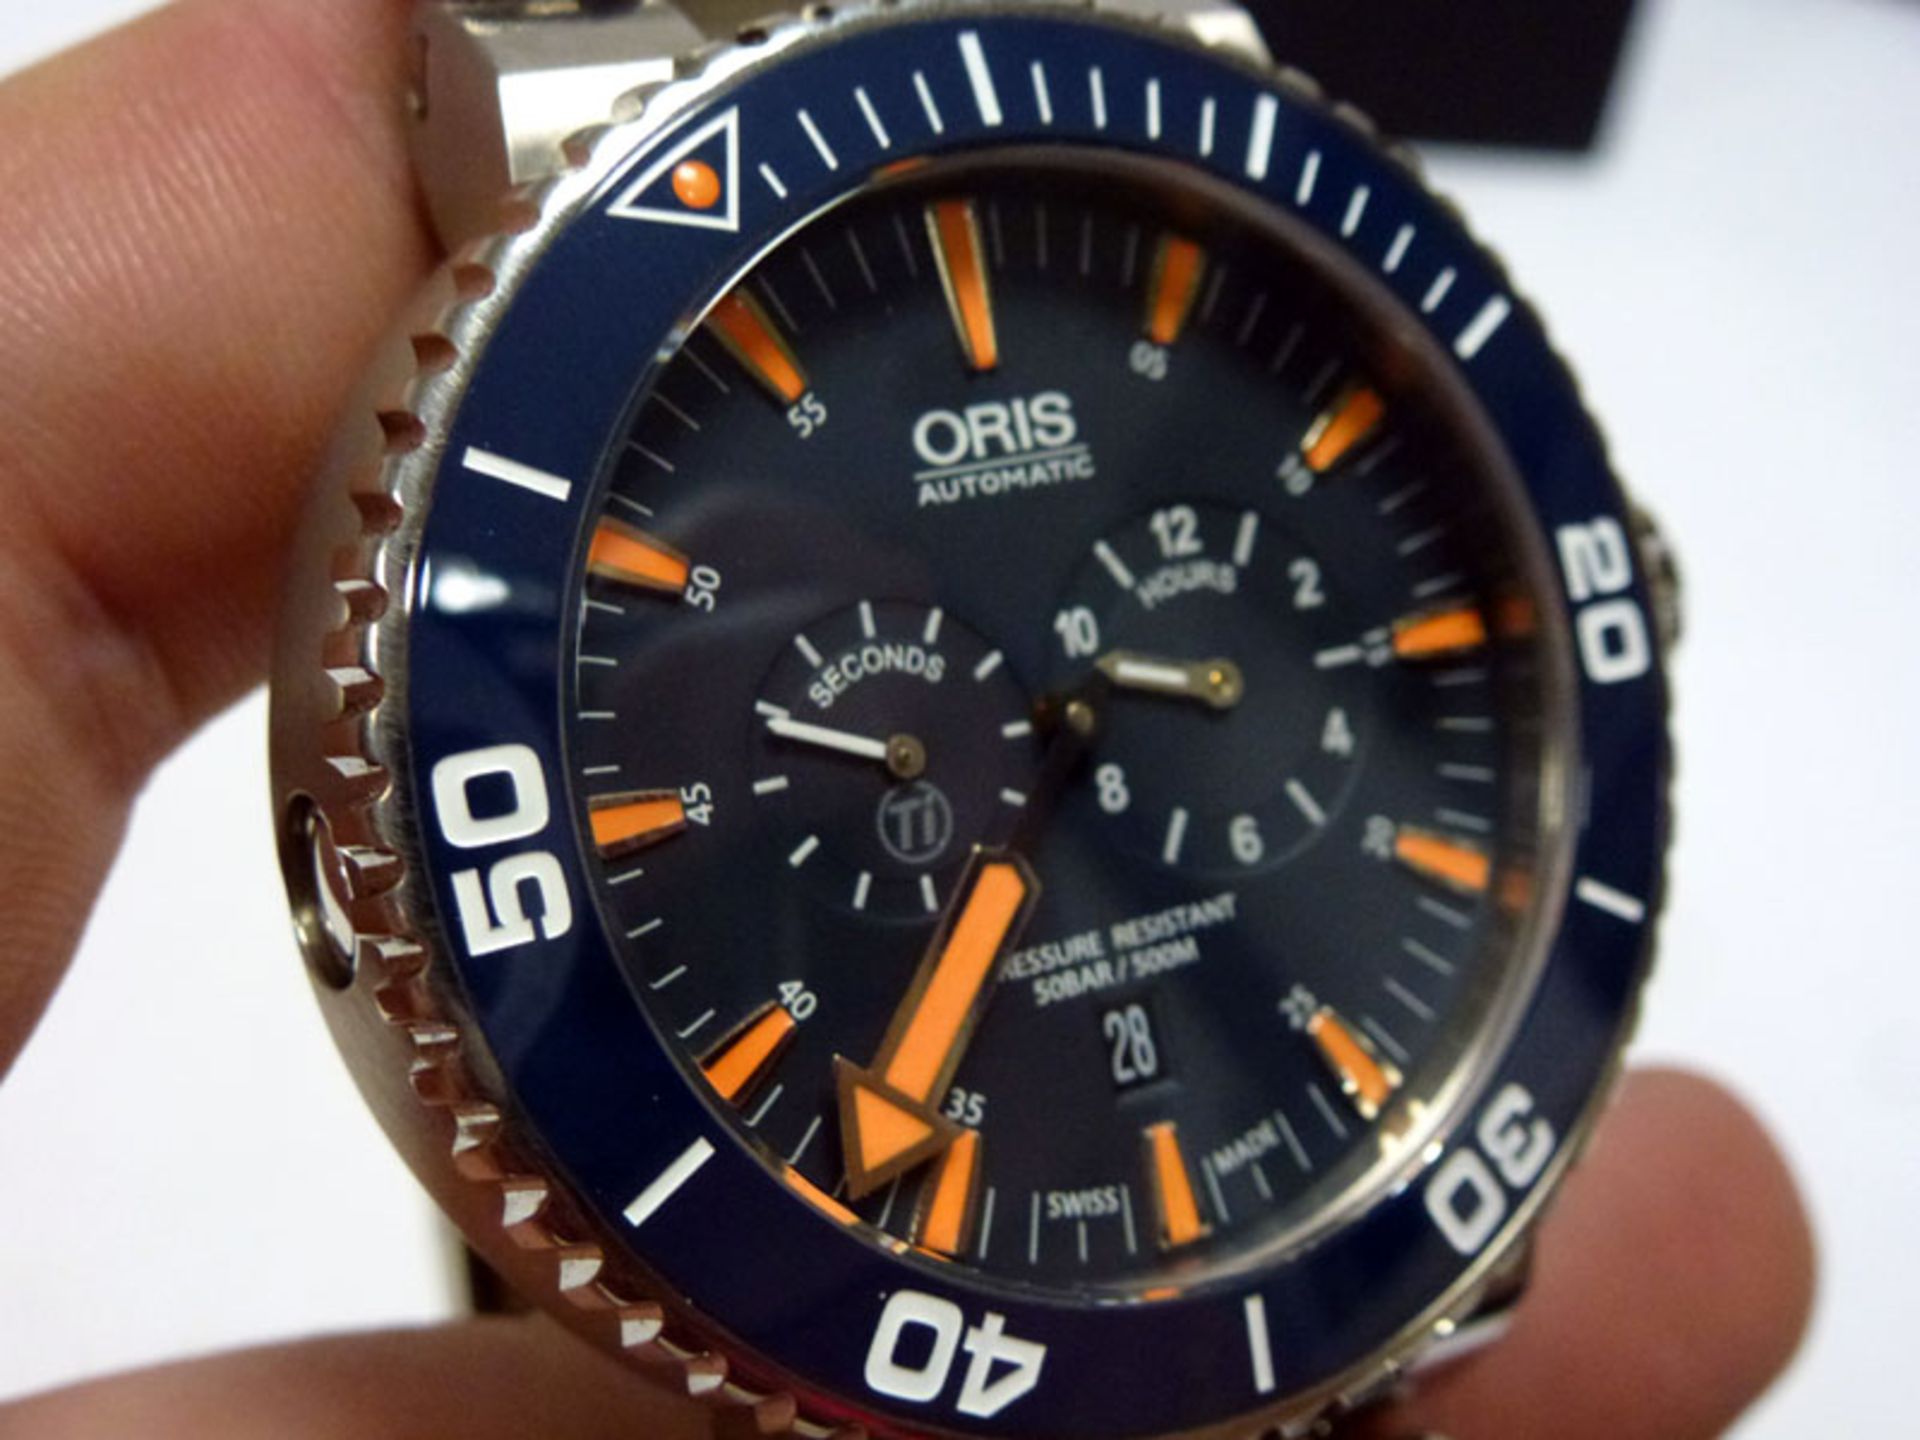 Oris 749 calibre automatic movement with bi-directional red rotor, 38-hour power reserve, date - Image 4 of 7